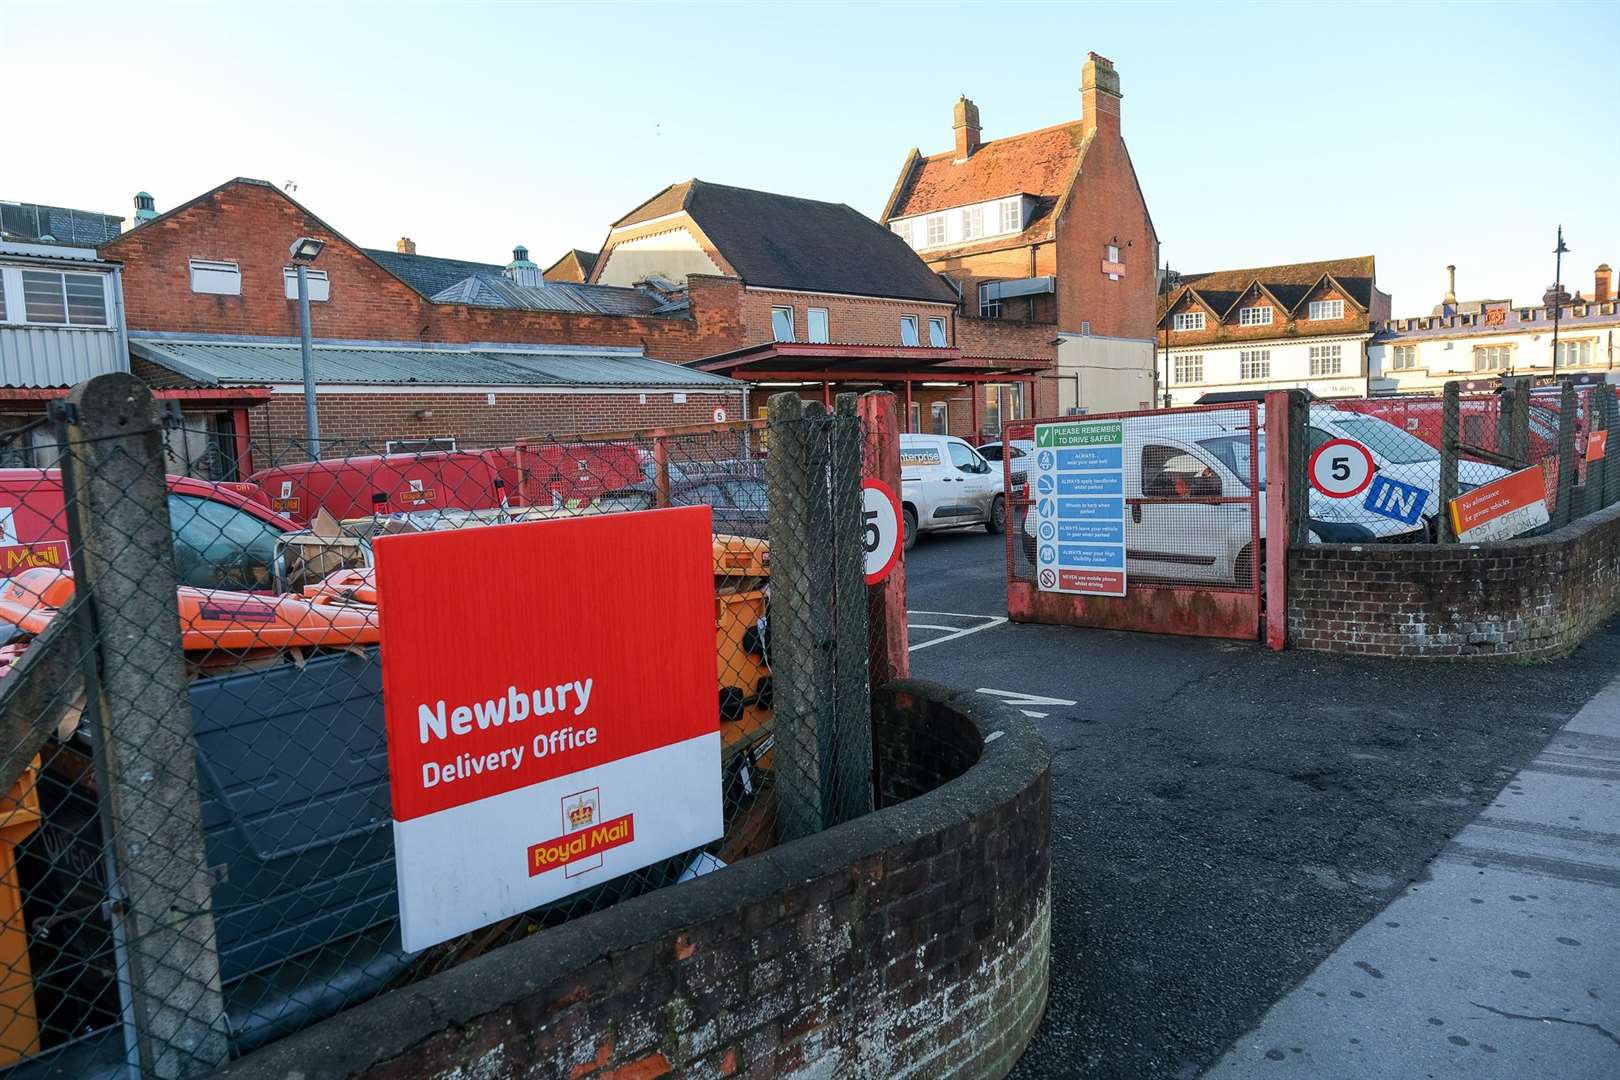 The Newbury Delivery Office has reported staff sicknesses.